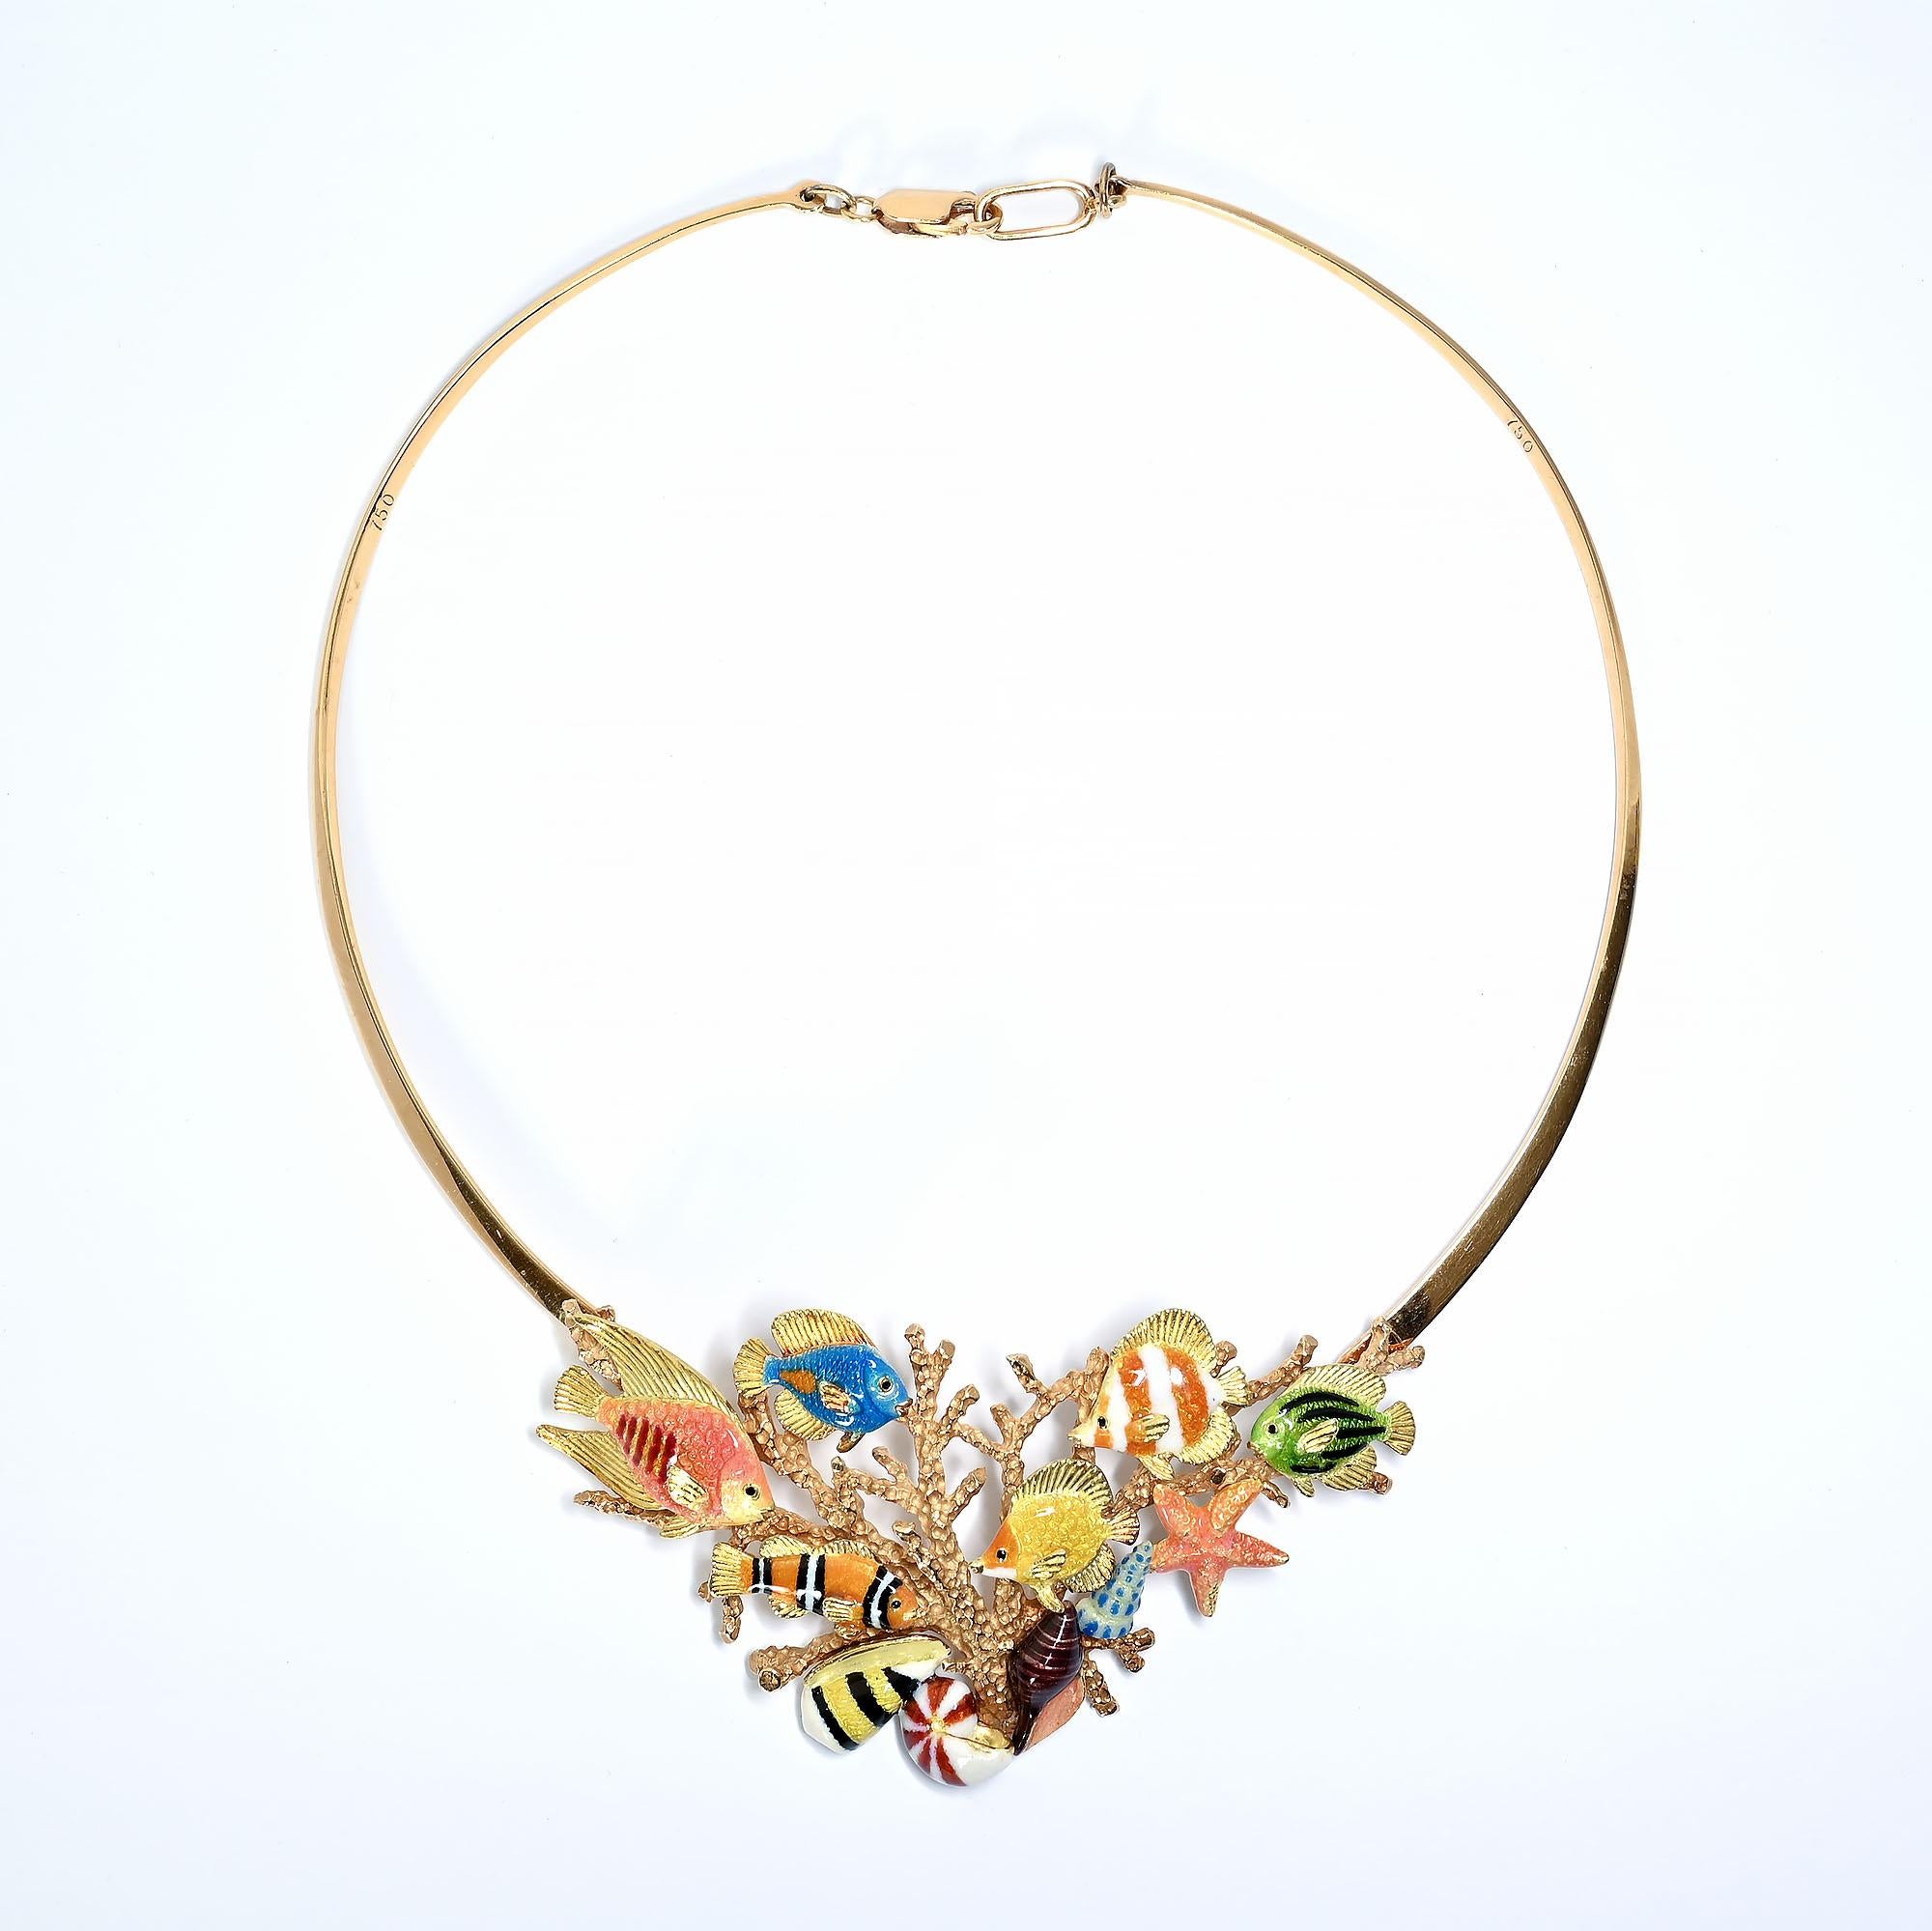 Colorful enamel fish swim around a variety of shells; starfish  and coral in this most unusual 18 karat gold necklace by Kabali. It measures 14 inches from the clasp to the start of the fish medallion and then  extends another 2 inches. Each element